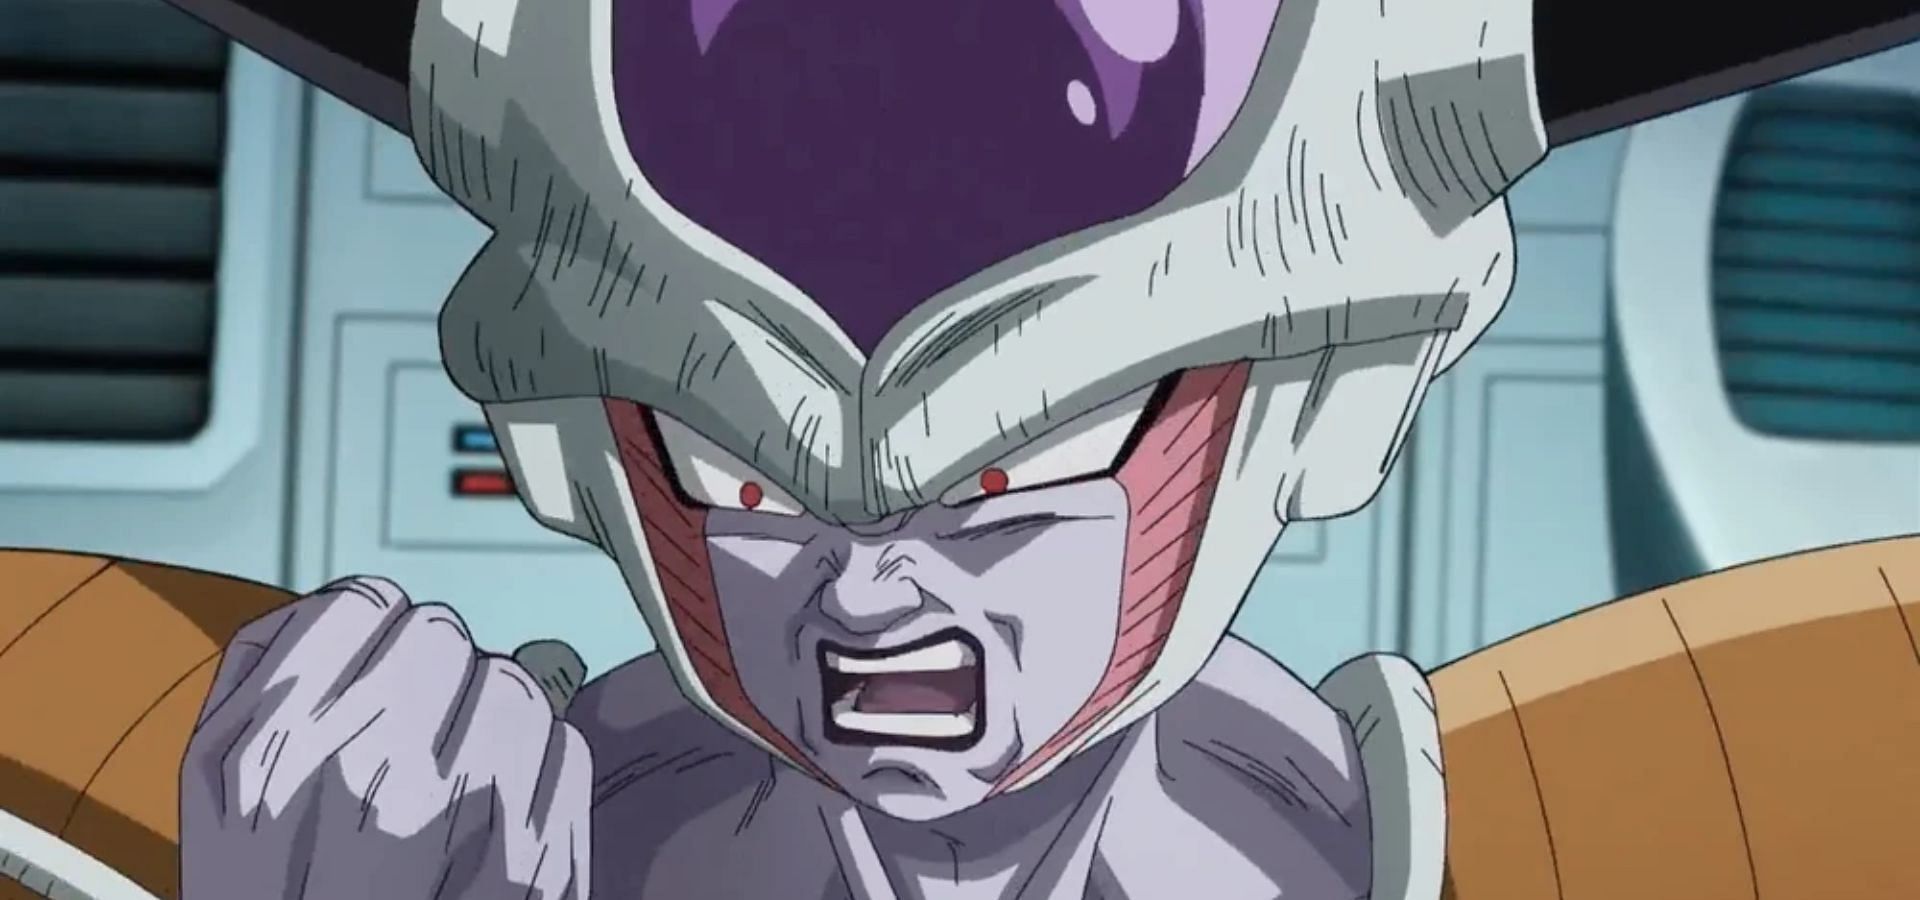 Frieza, a popular character from Dragon Ball Z (Image via Toei Animation)